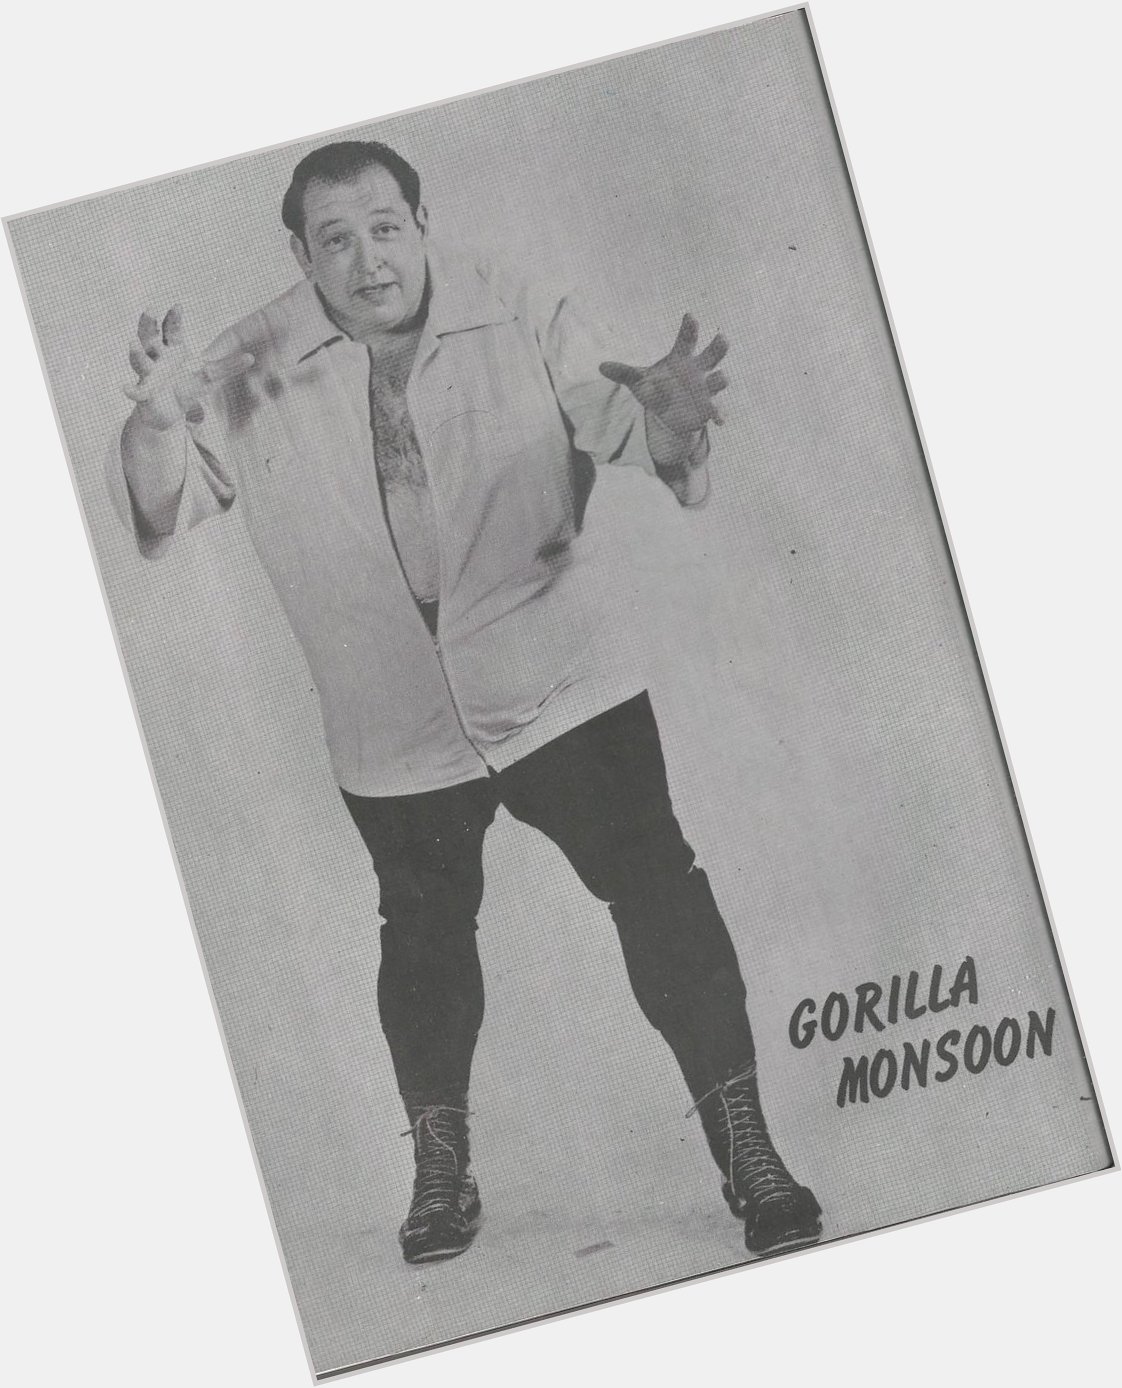  Happy heavenly birthday  Gorilla Monsoon !  You are deeply missed and loved . Rest in peace      